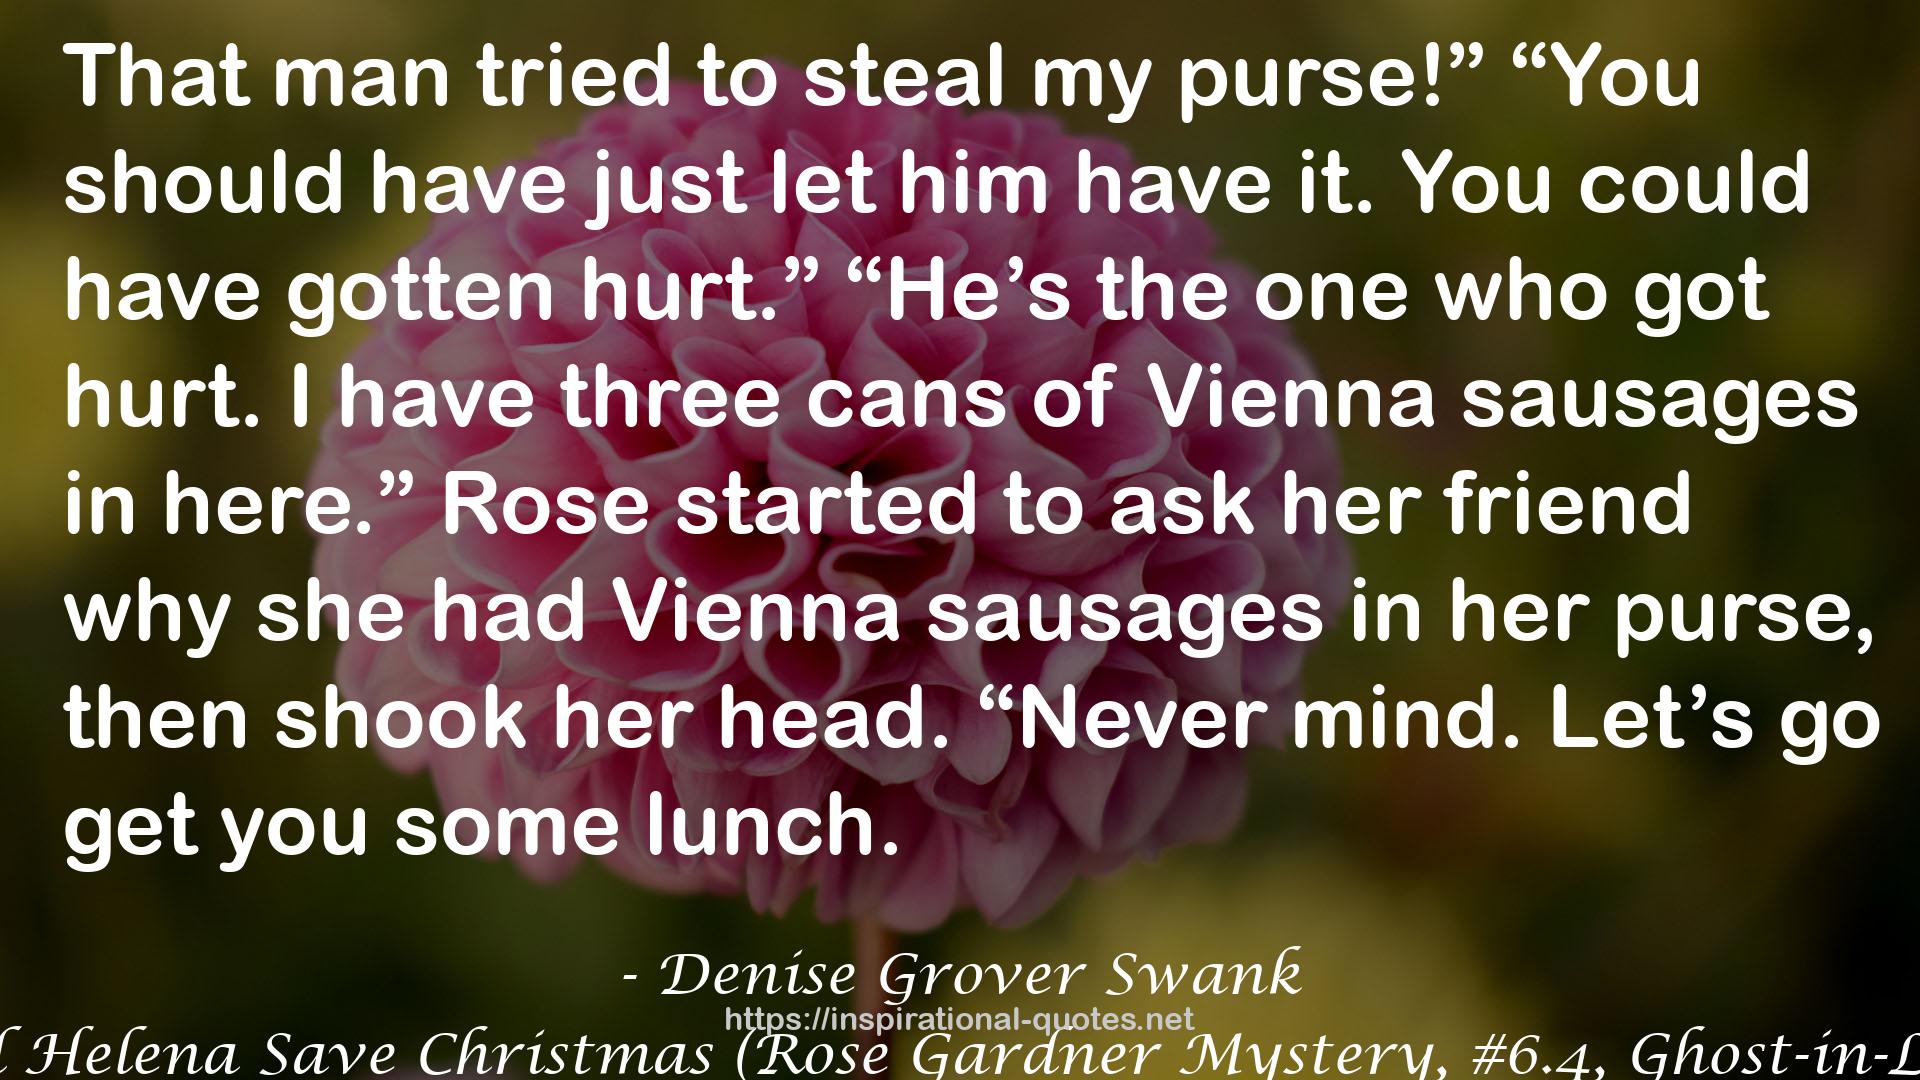 Rose and Helena Save Christmas (Rose Gardner Mystery, #6.4, Ghost-in-Law, #6.5) QUOTES